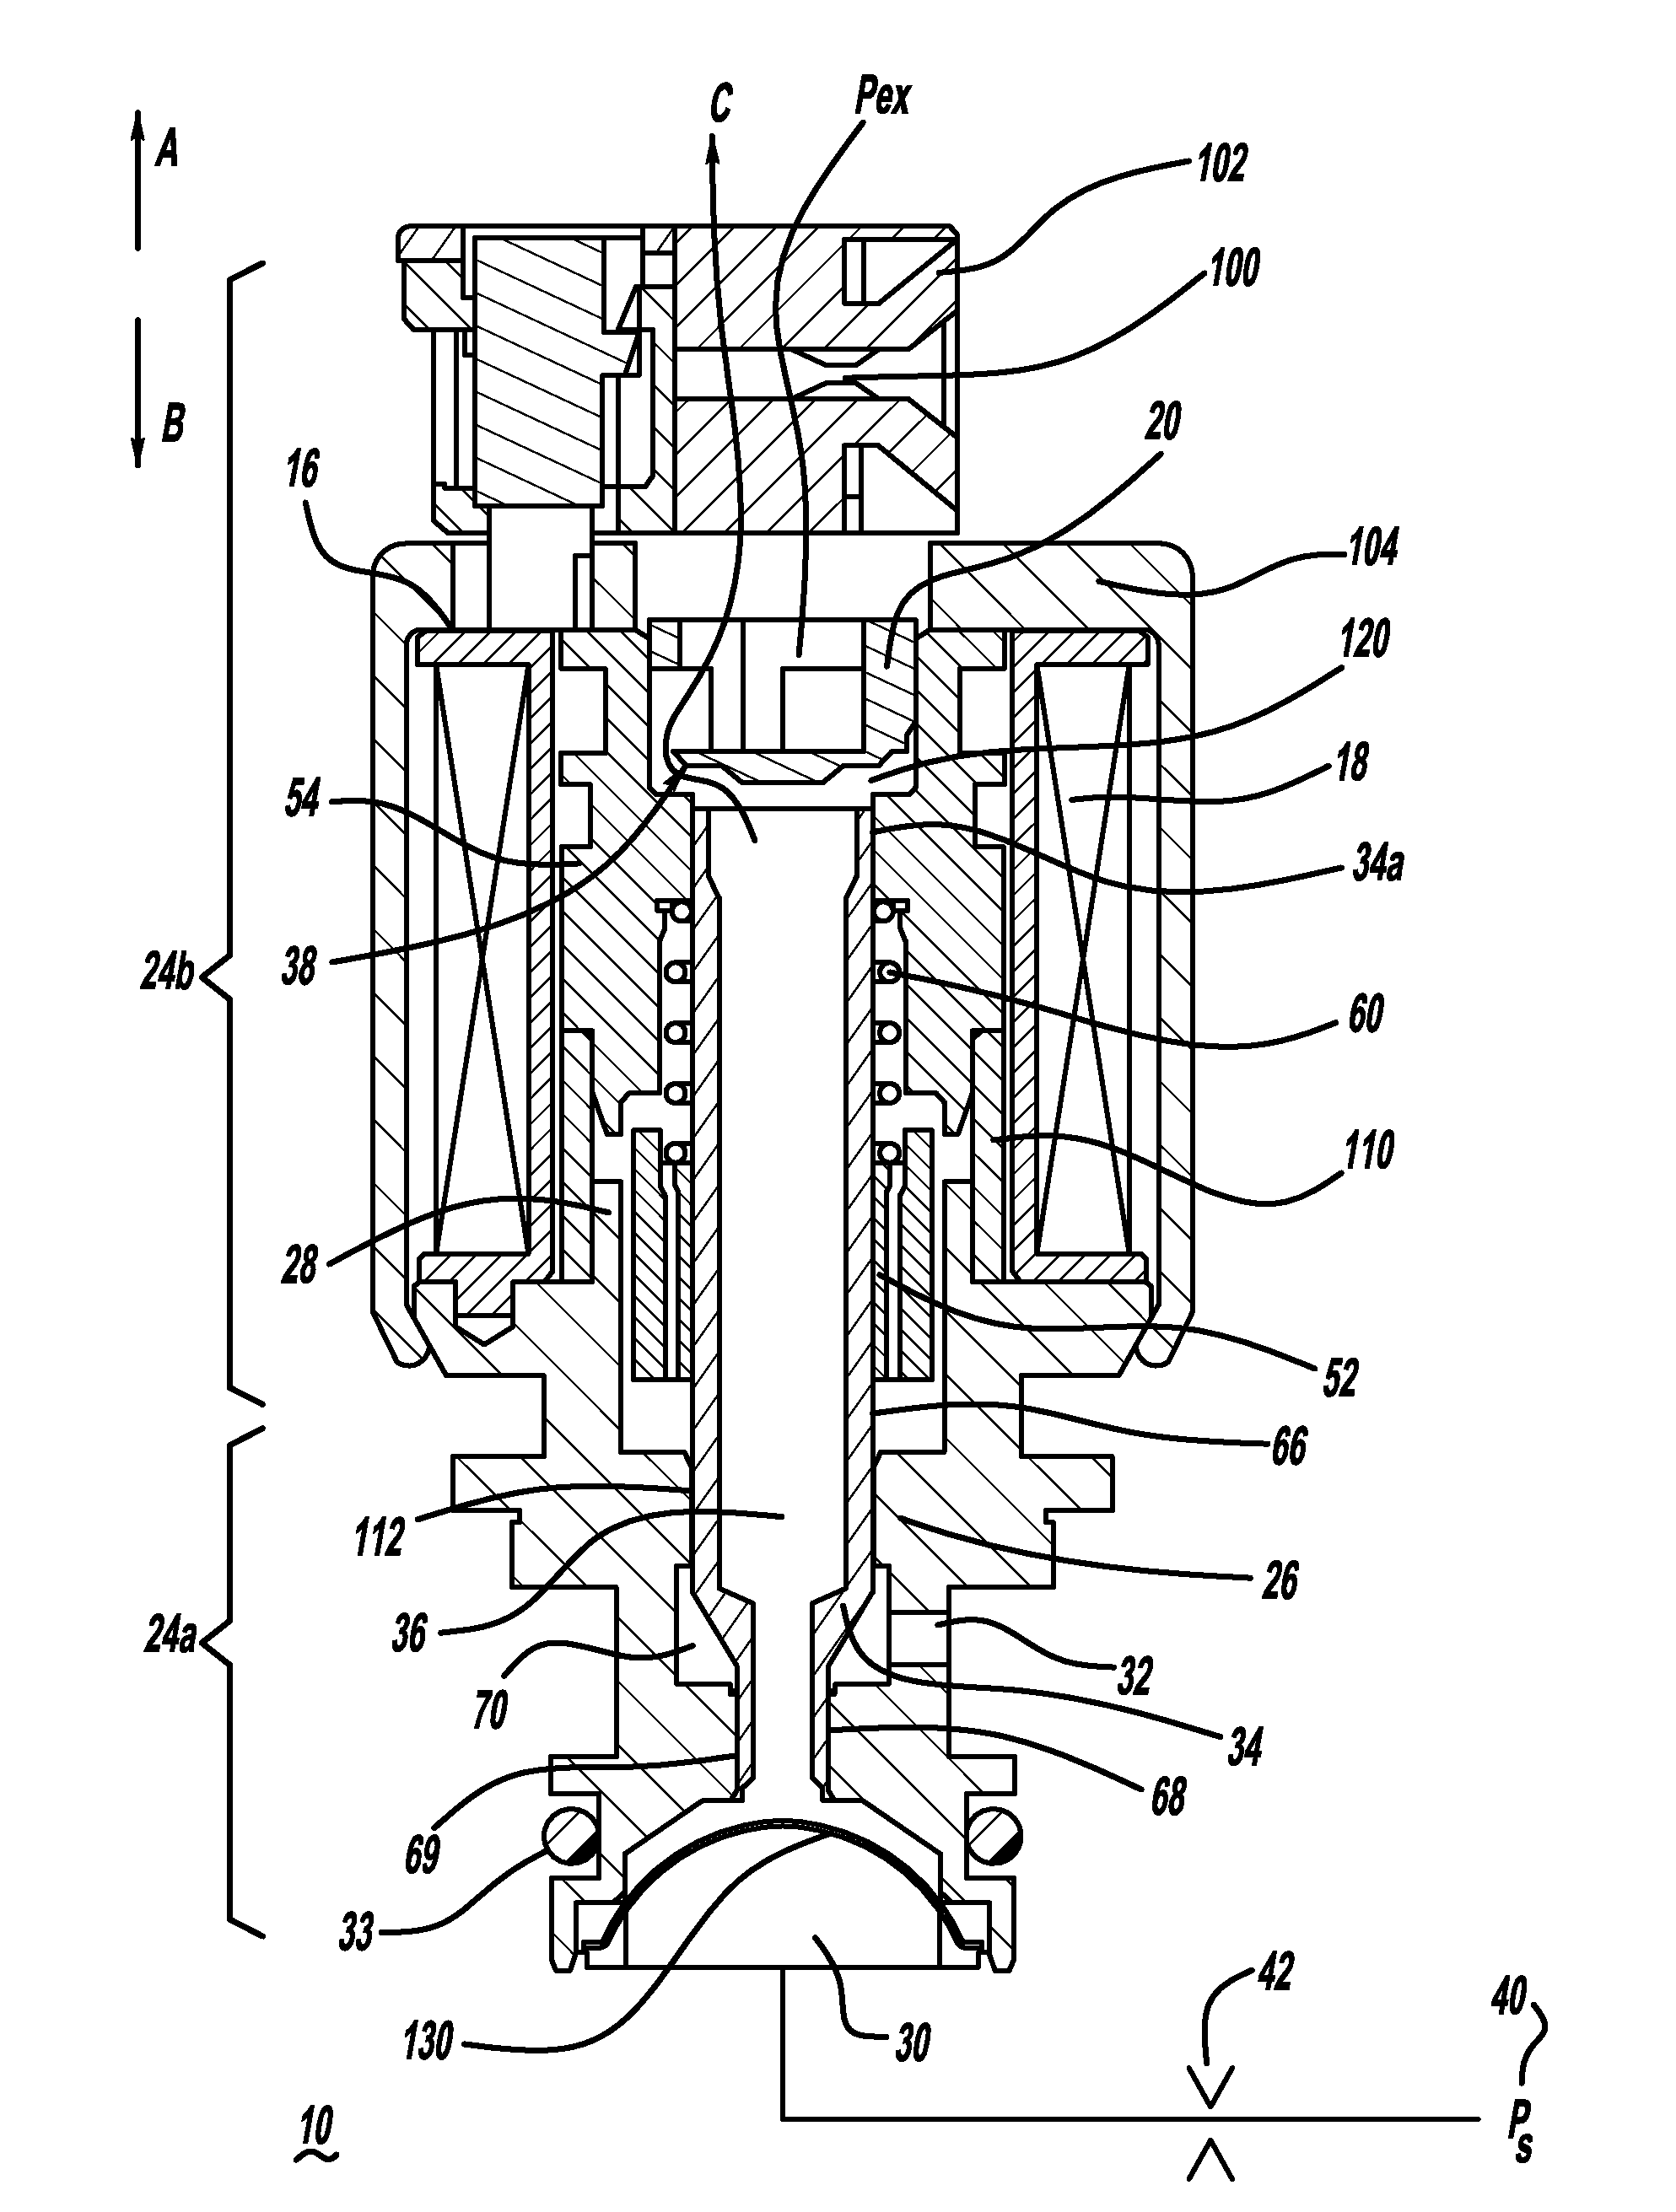 Open end variable bleed solenoid (VBS) valve with inherent viscous dampening